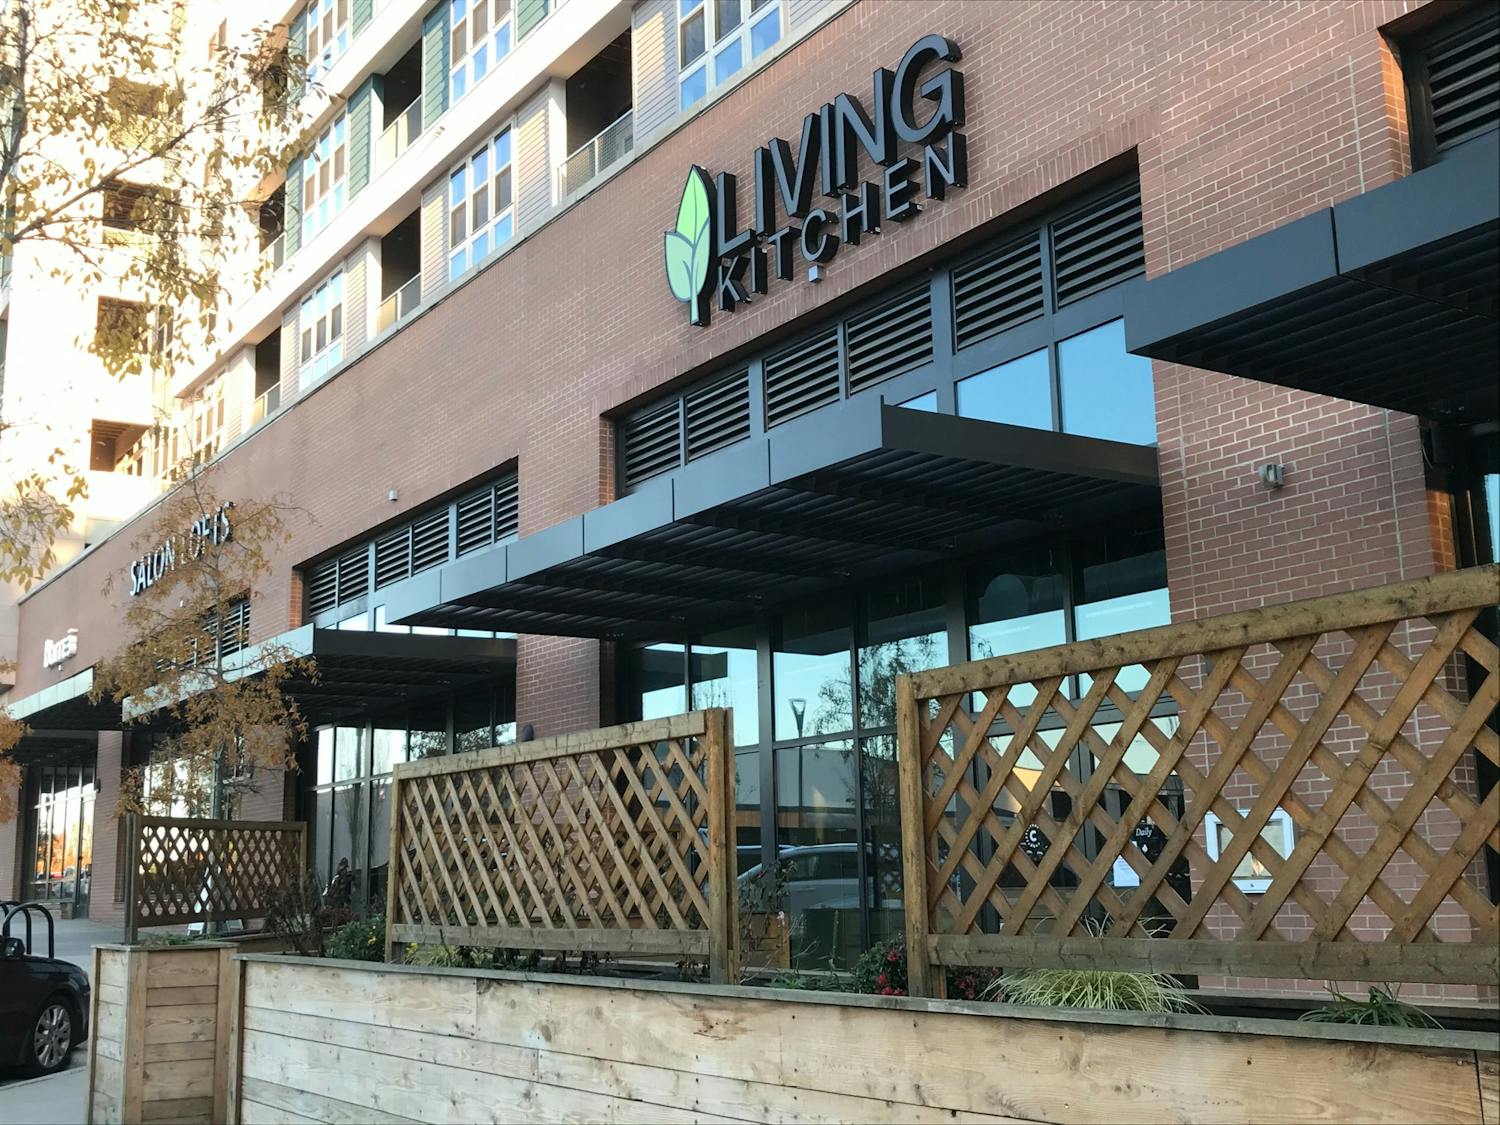 The Living Kitchen is closing its location in Chapel Hill at the Berkshire Chapel Hill Apartments.